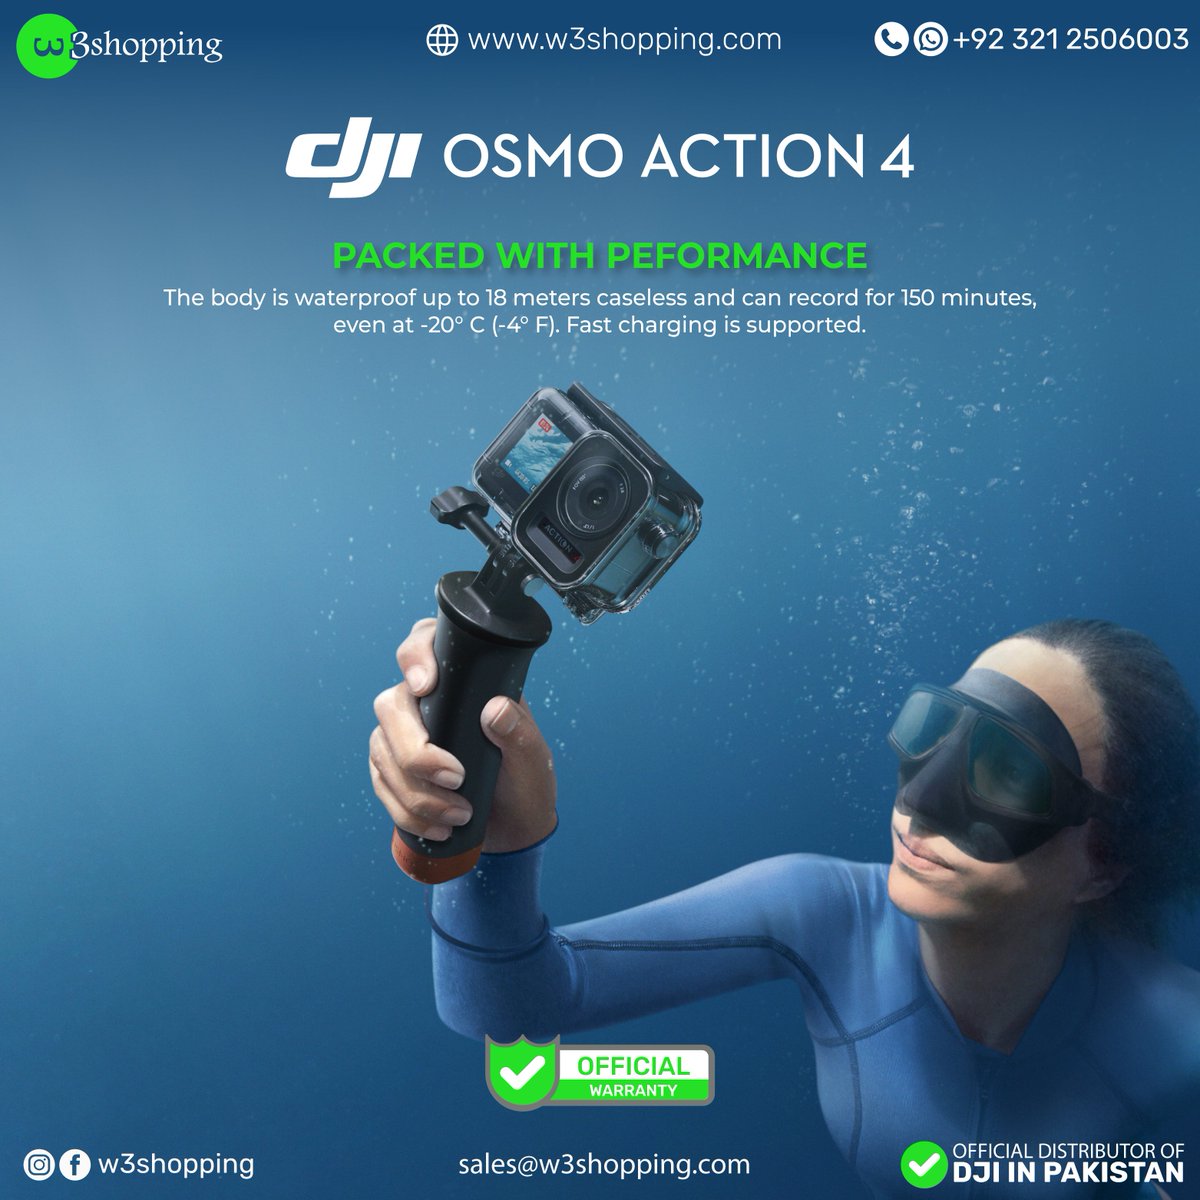 Dive into the action with DJI Osmo Action 4! 🌊 Capture every thrilling moment with its 155° ultra-wide angle lens.📷
Available exclusively at W3 Shopping.🛒

#DJI #OsmoAction4 #UltraWideAngle #ActionCamera #W3Shopping #OfficialDistributor #AdventureTime #CaptureTheMoment